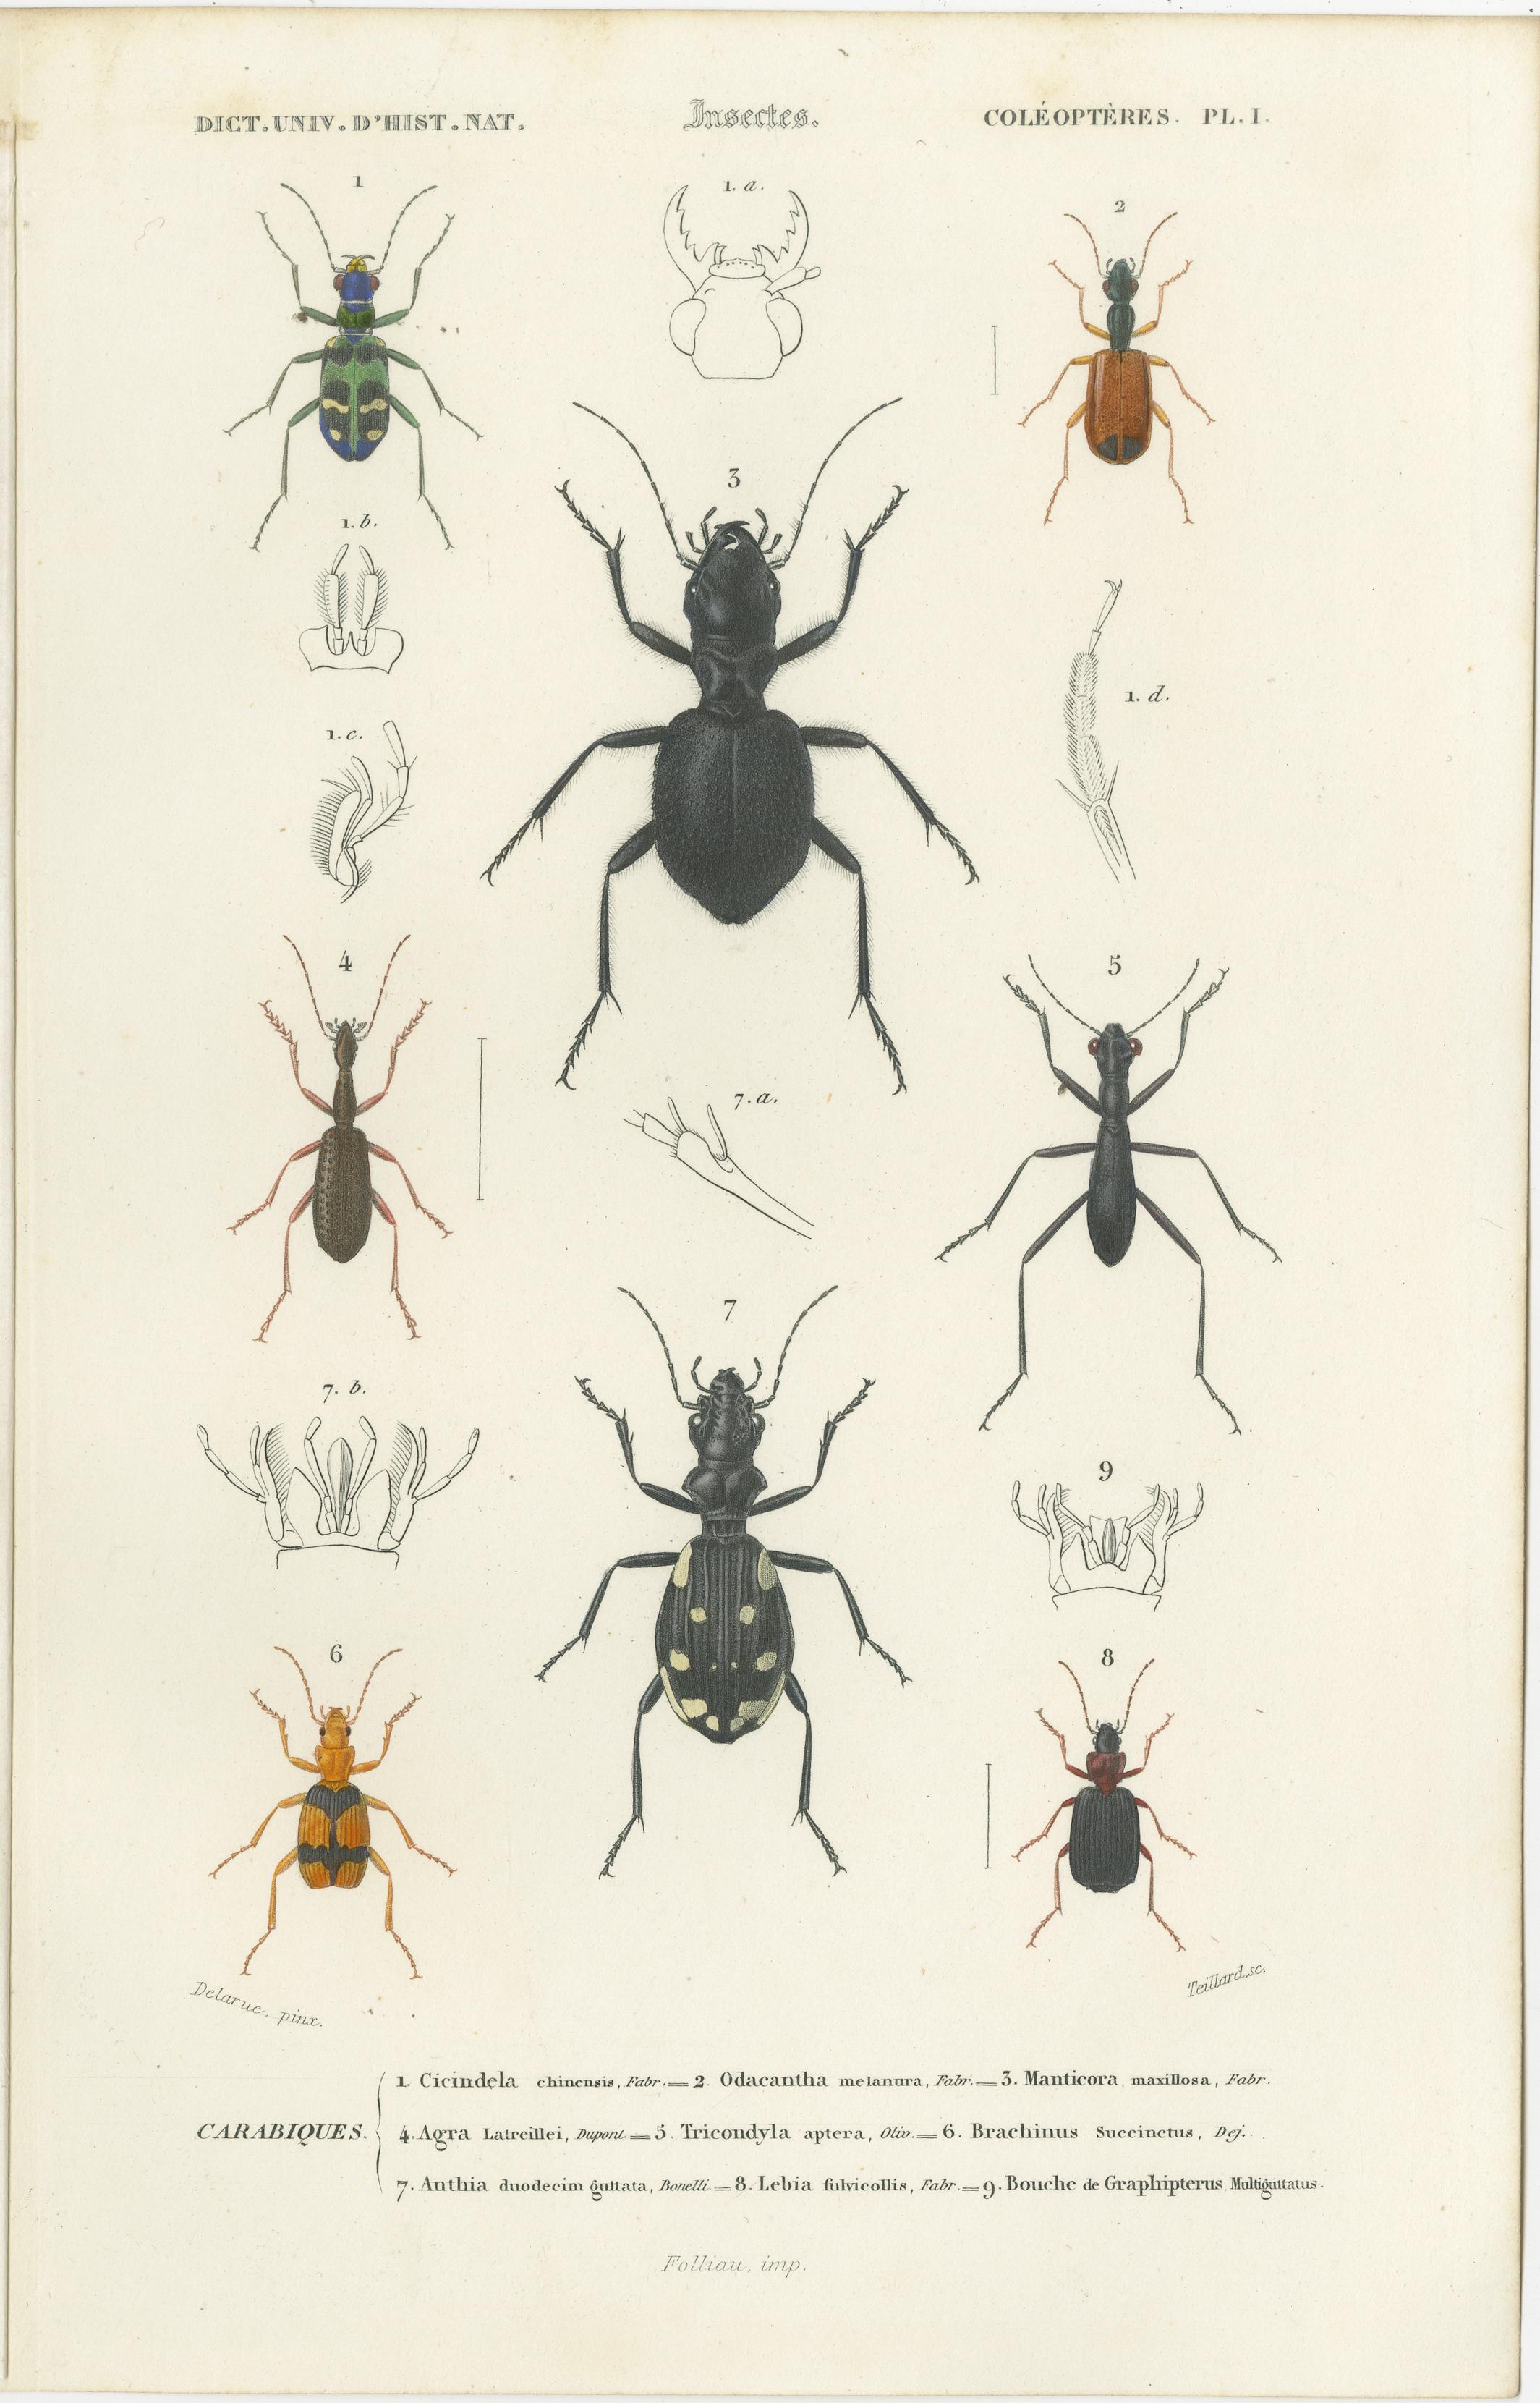 Set of 20 original antique prints of many beetles and other insects. These prints originate from 'Dictionnaire universel d'Histoire Naturelle' by d'Orbigny. Published 1861. 

Charles Henry Dessalines d'Orbigny was a French botanist and geologist